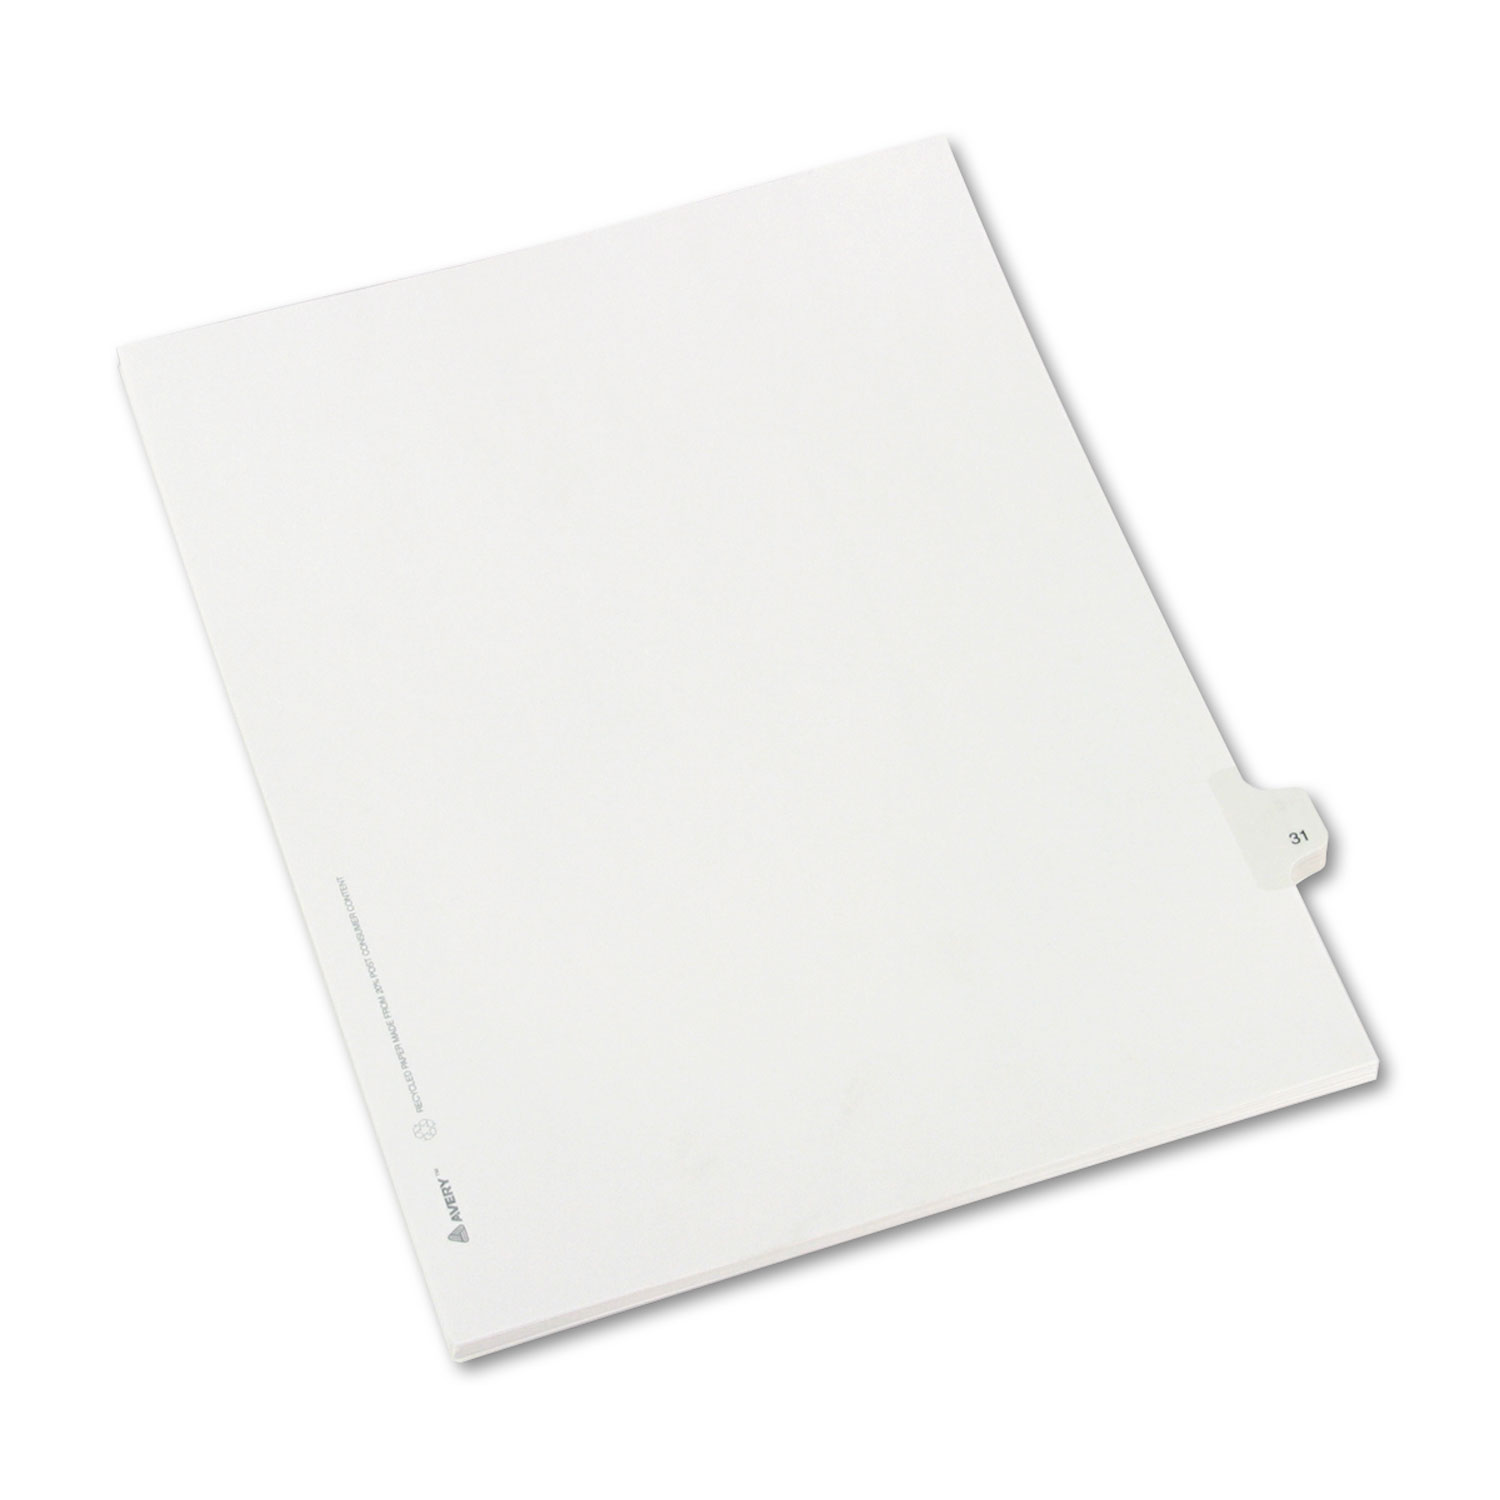 Allstate-Style Legal Exhibit Side Tab Divider, Title: 31, Letter, White, 25/Pack